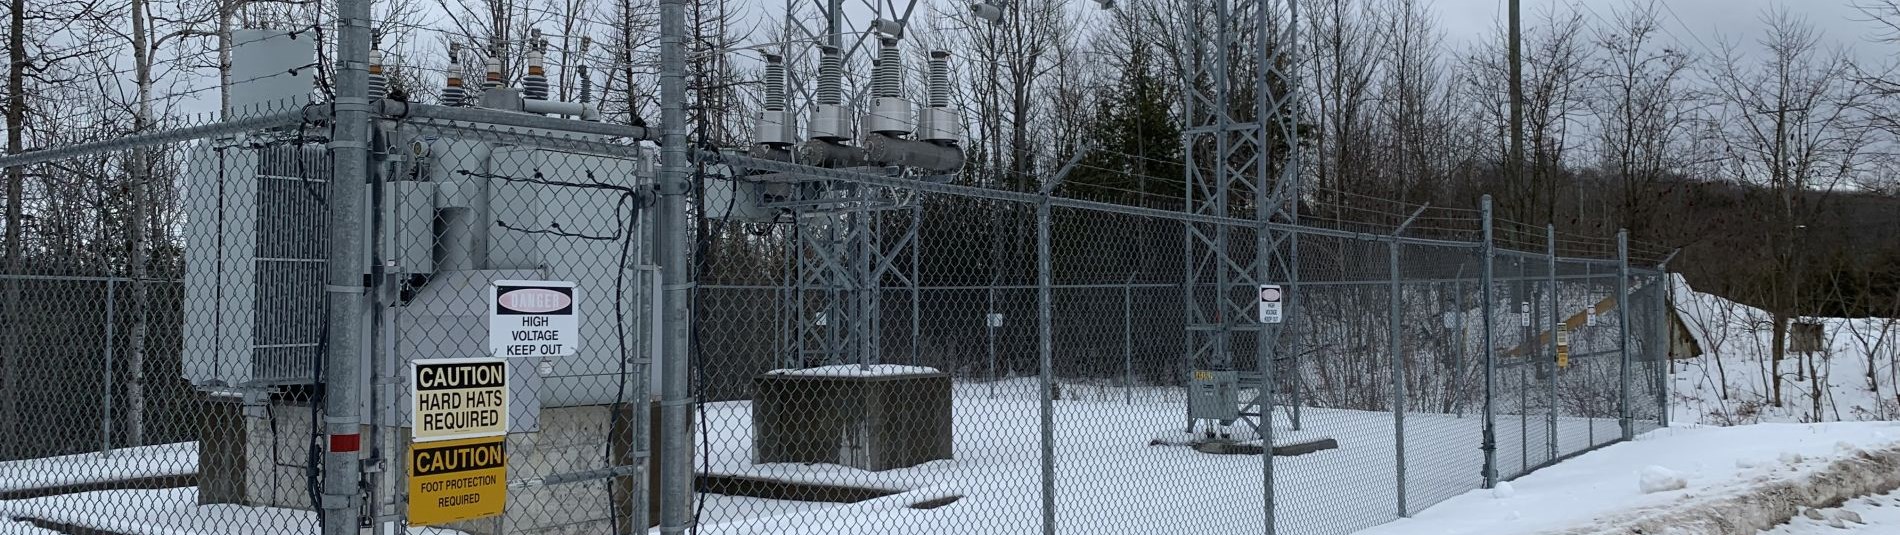 Electrical substation with warning signs